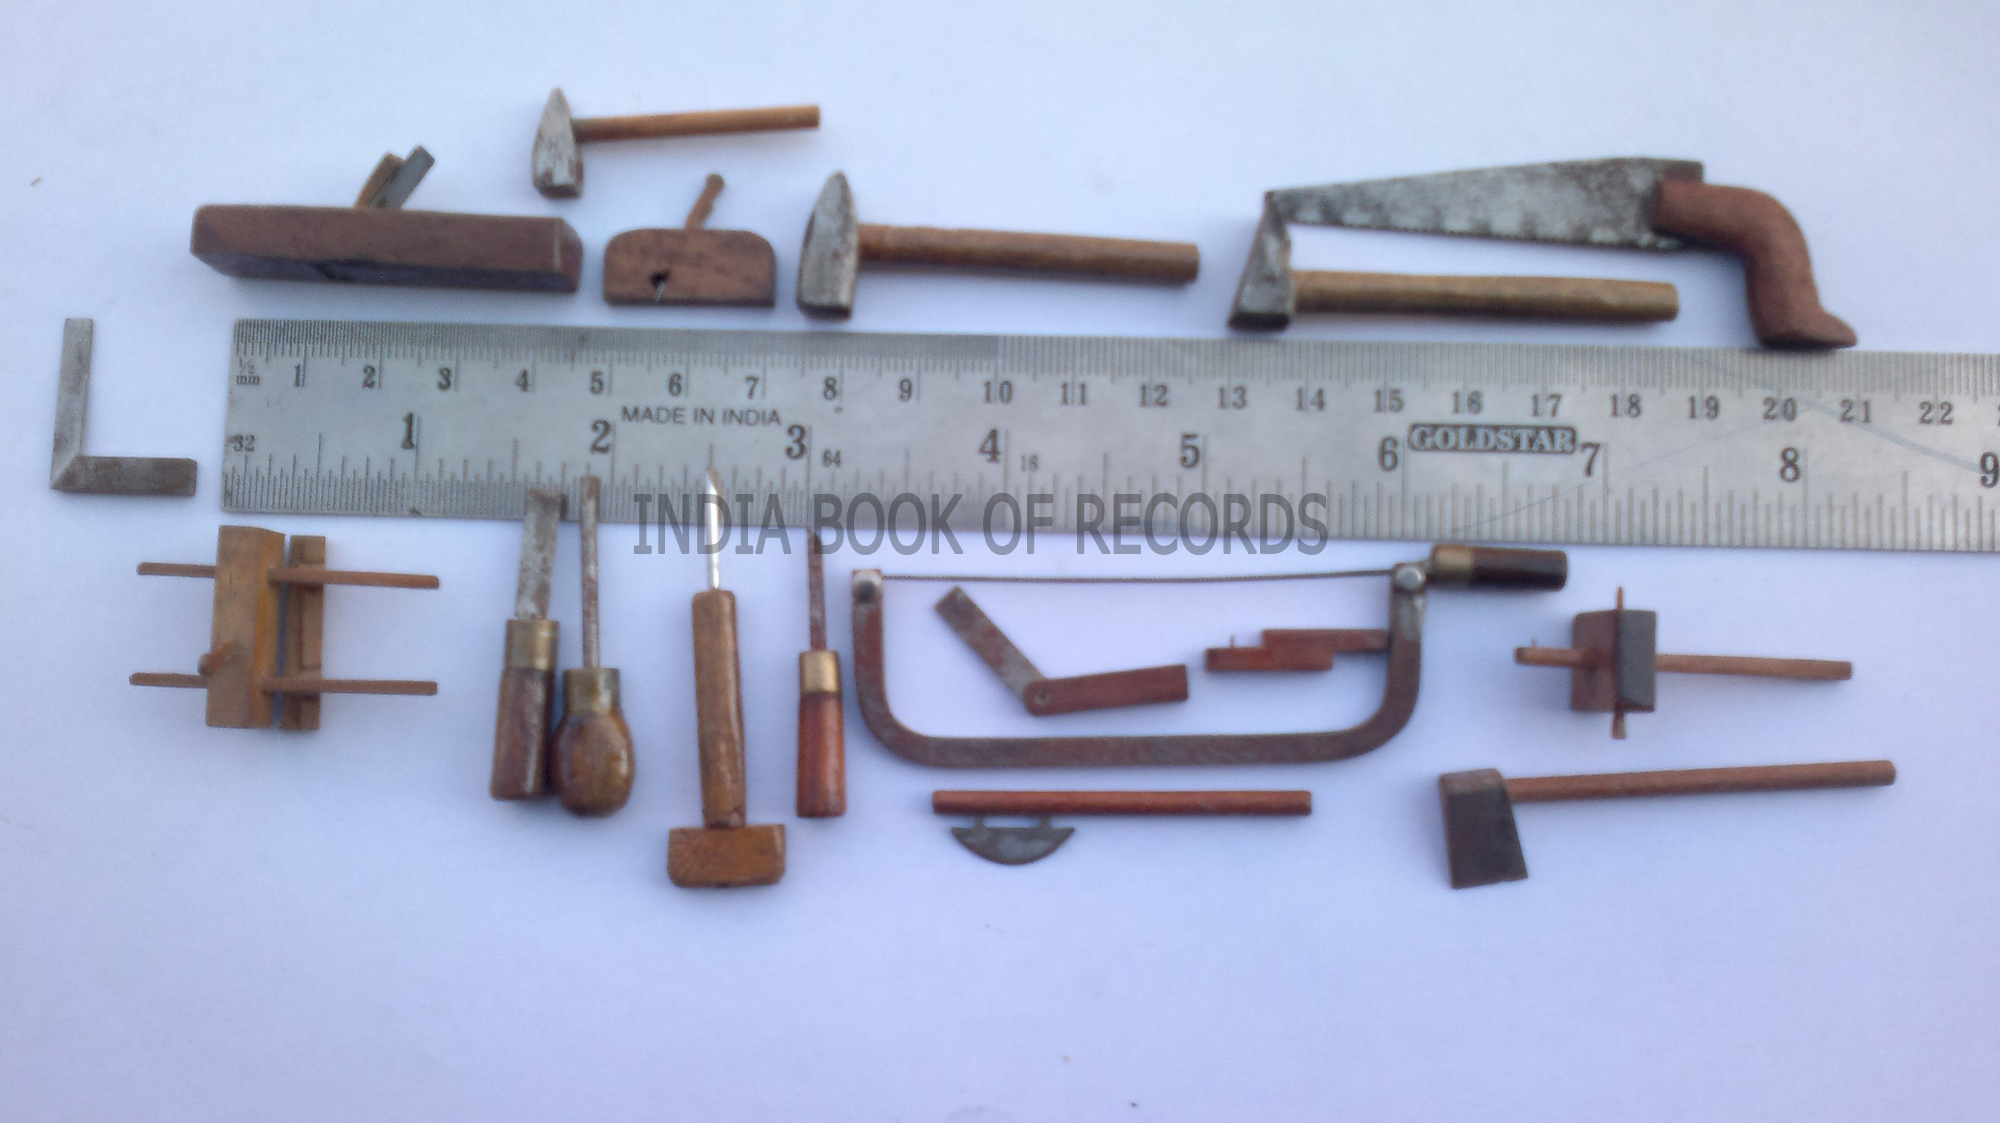 MINIATURE WOODWORKING HAND TOOLS - India Book of Records